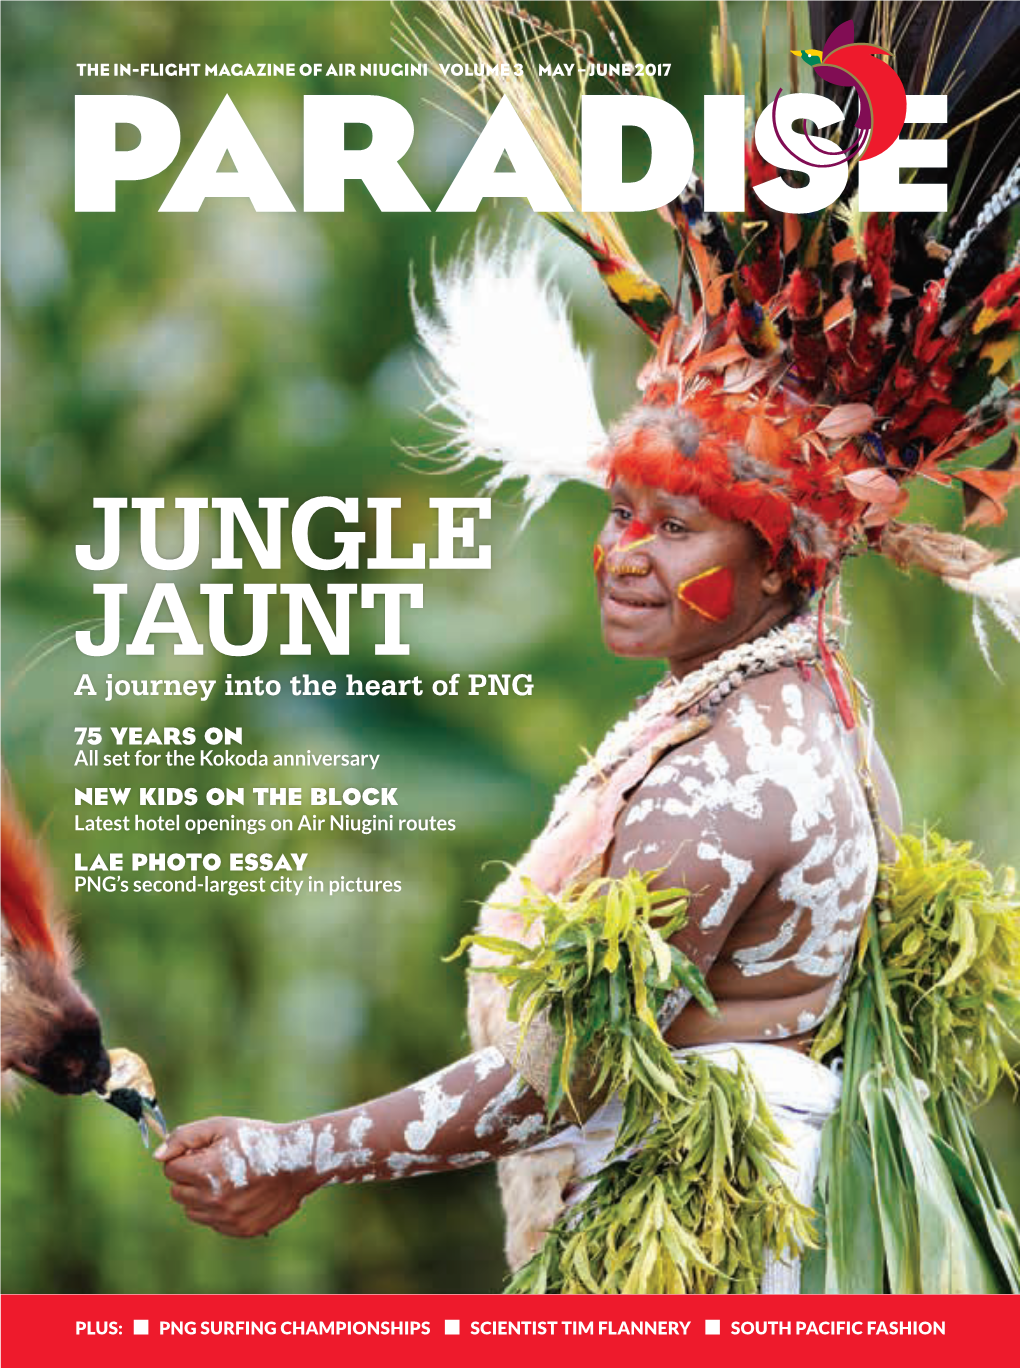 JUNGLE JAUNT a Journey Into the Heart of PNG 75 YEARS on All Set for the Kokoda Anniversary NEW KIDS on the BLOCK Latest Hotel Openings on Air Niugini Routes